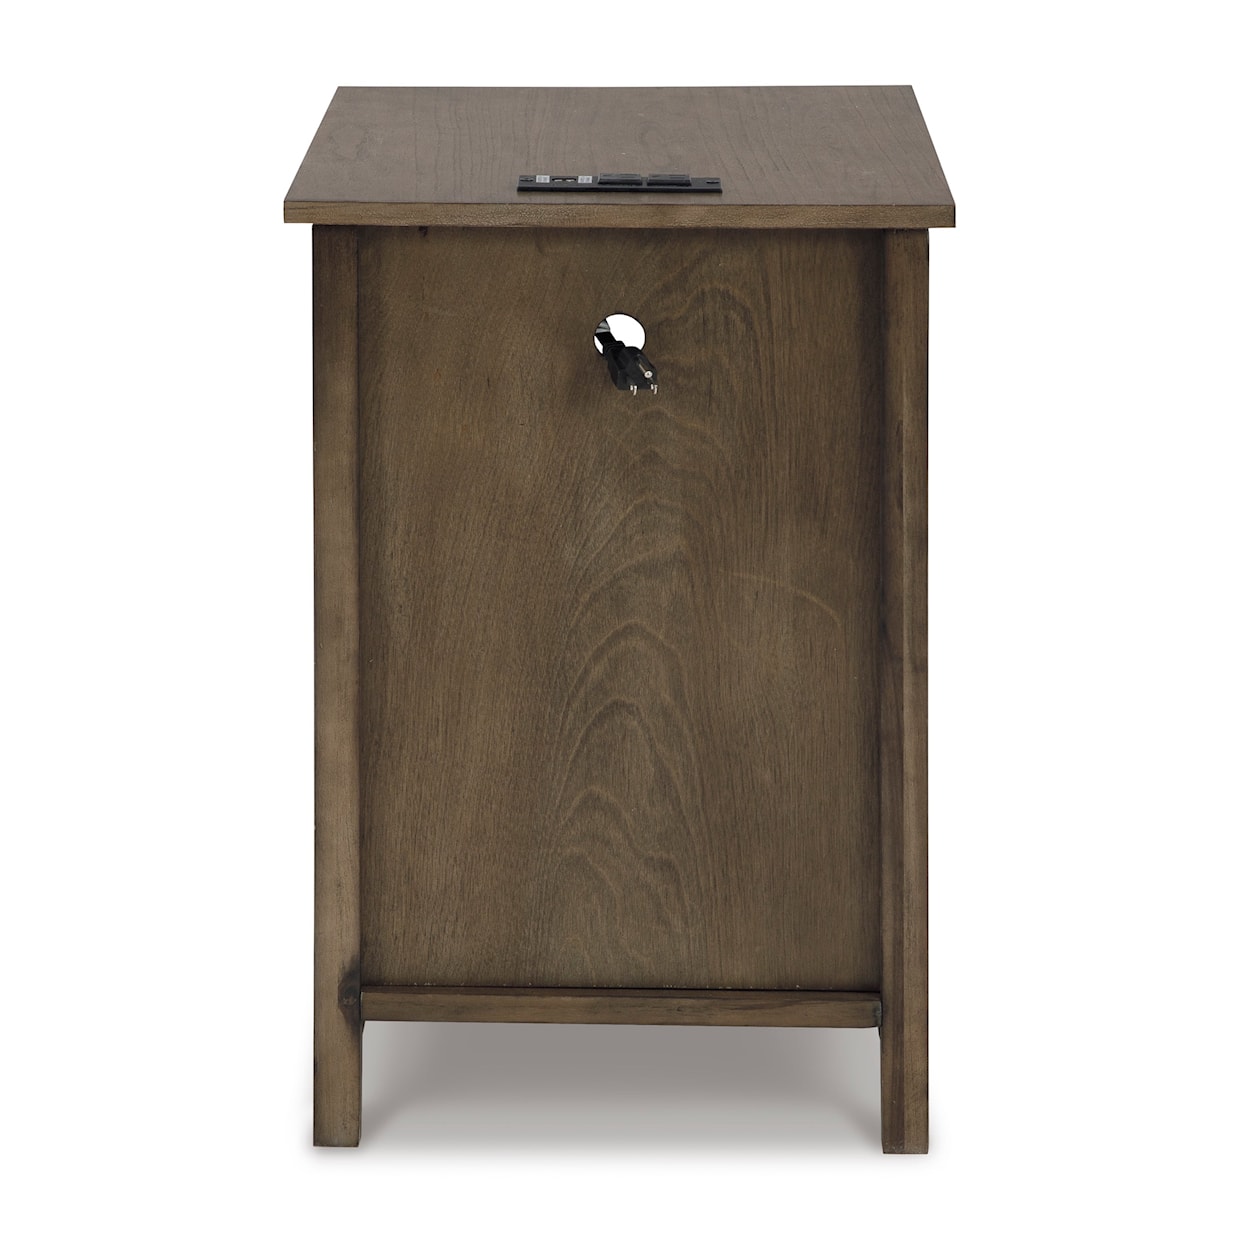 Signature Design by Ashley Treytown Chairside End Table